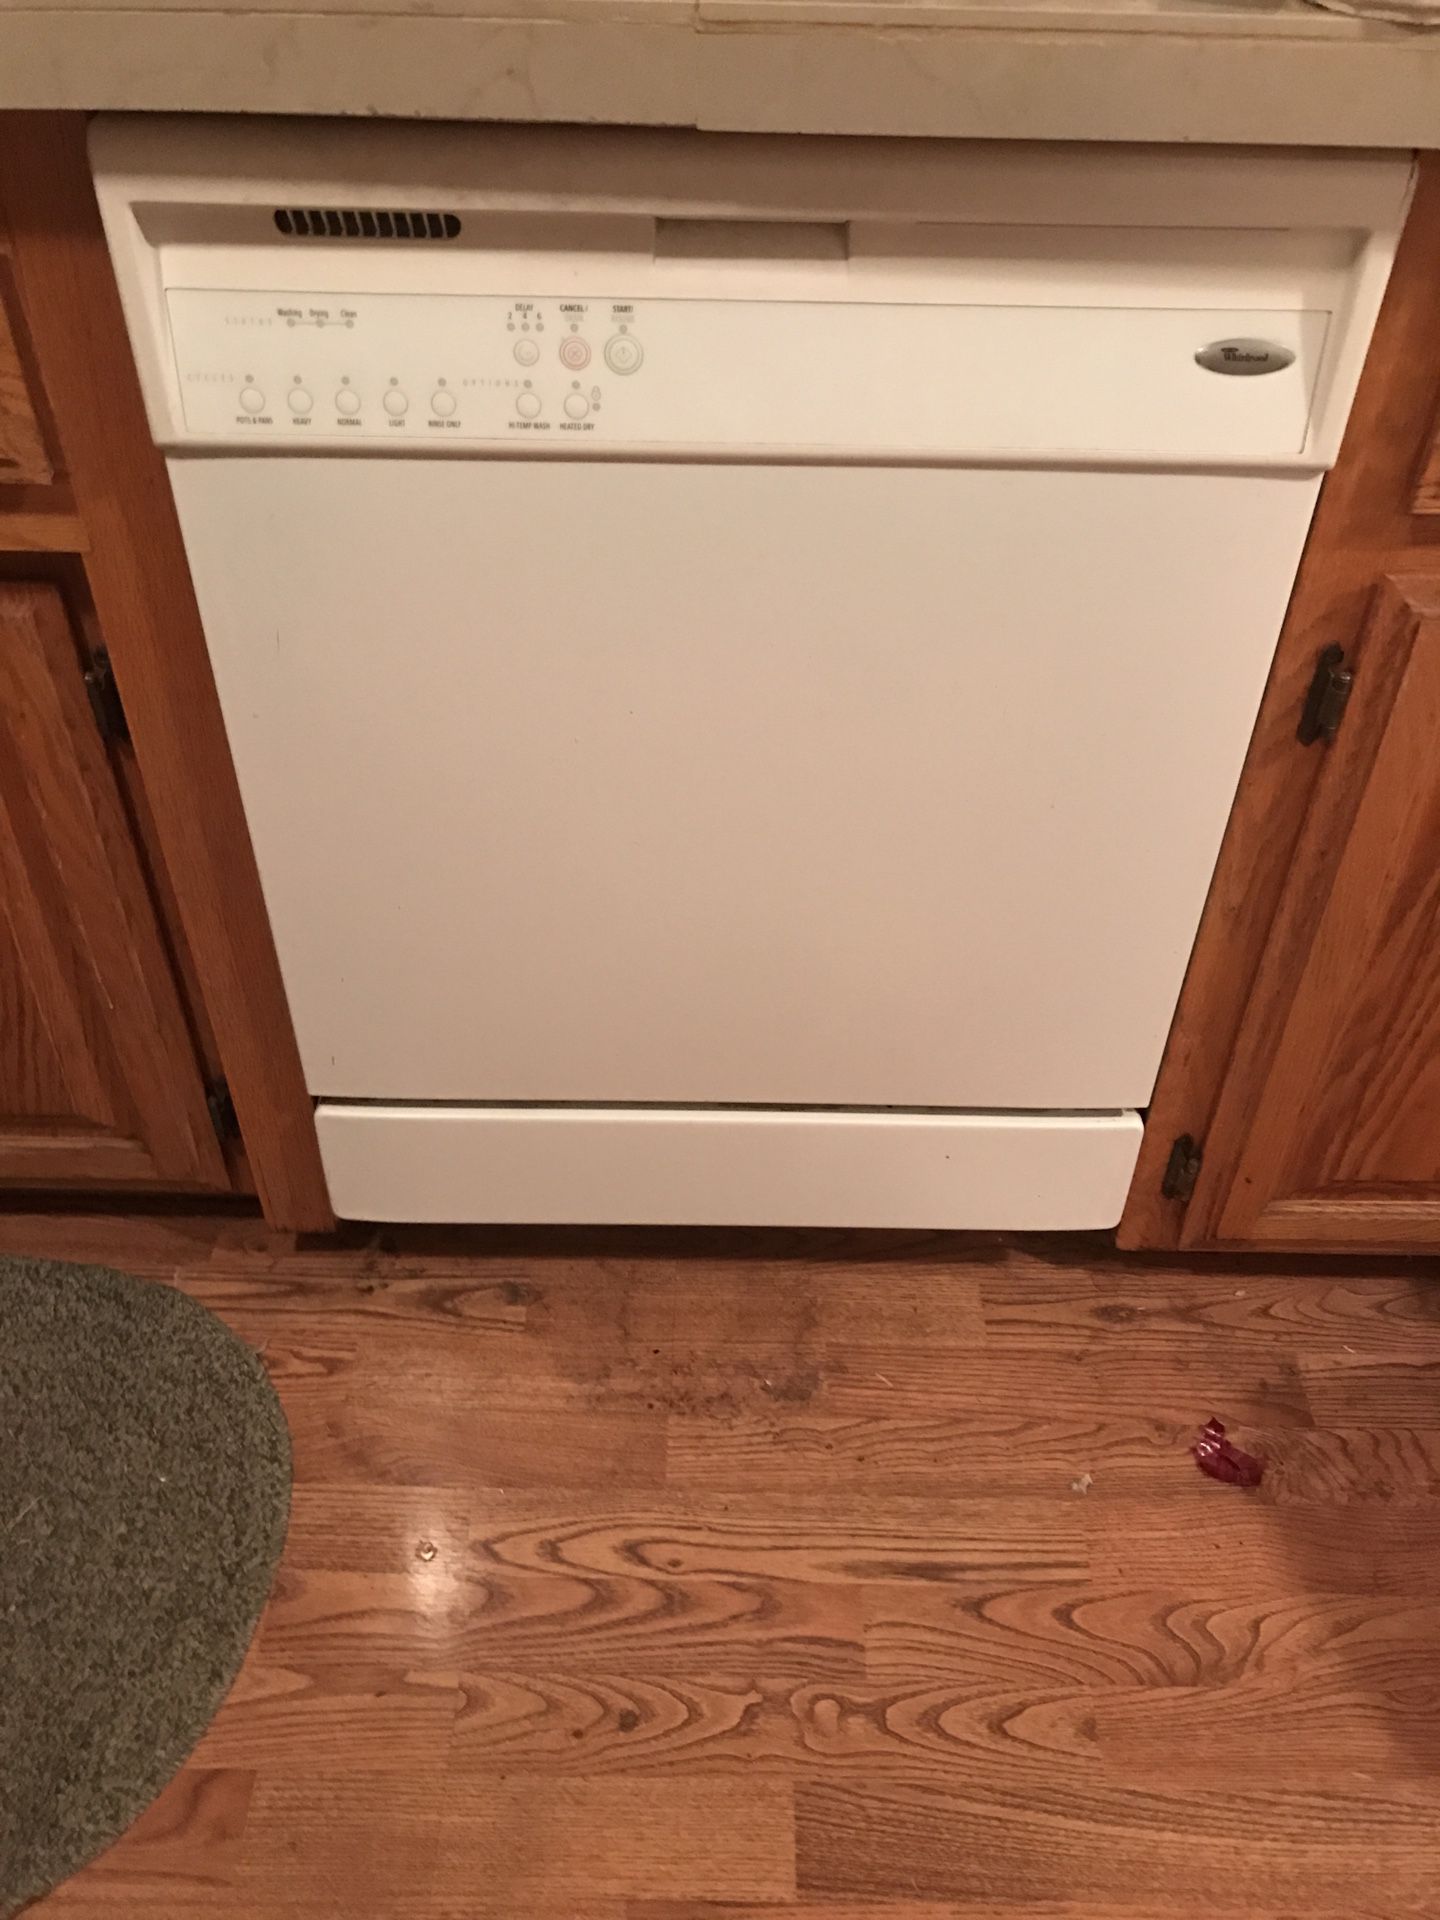 Whirlpool dishwasher remodeling works good no longer need priced to sell quick